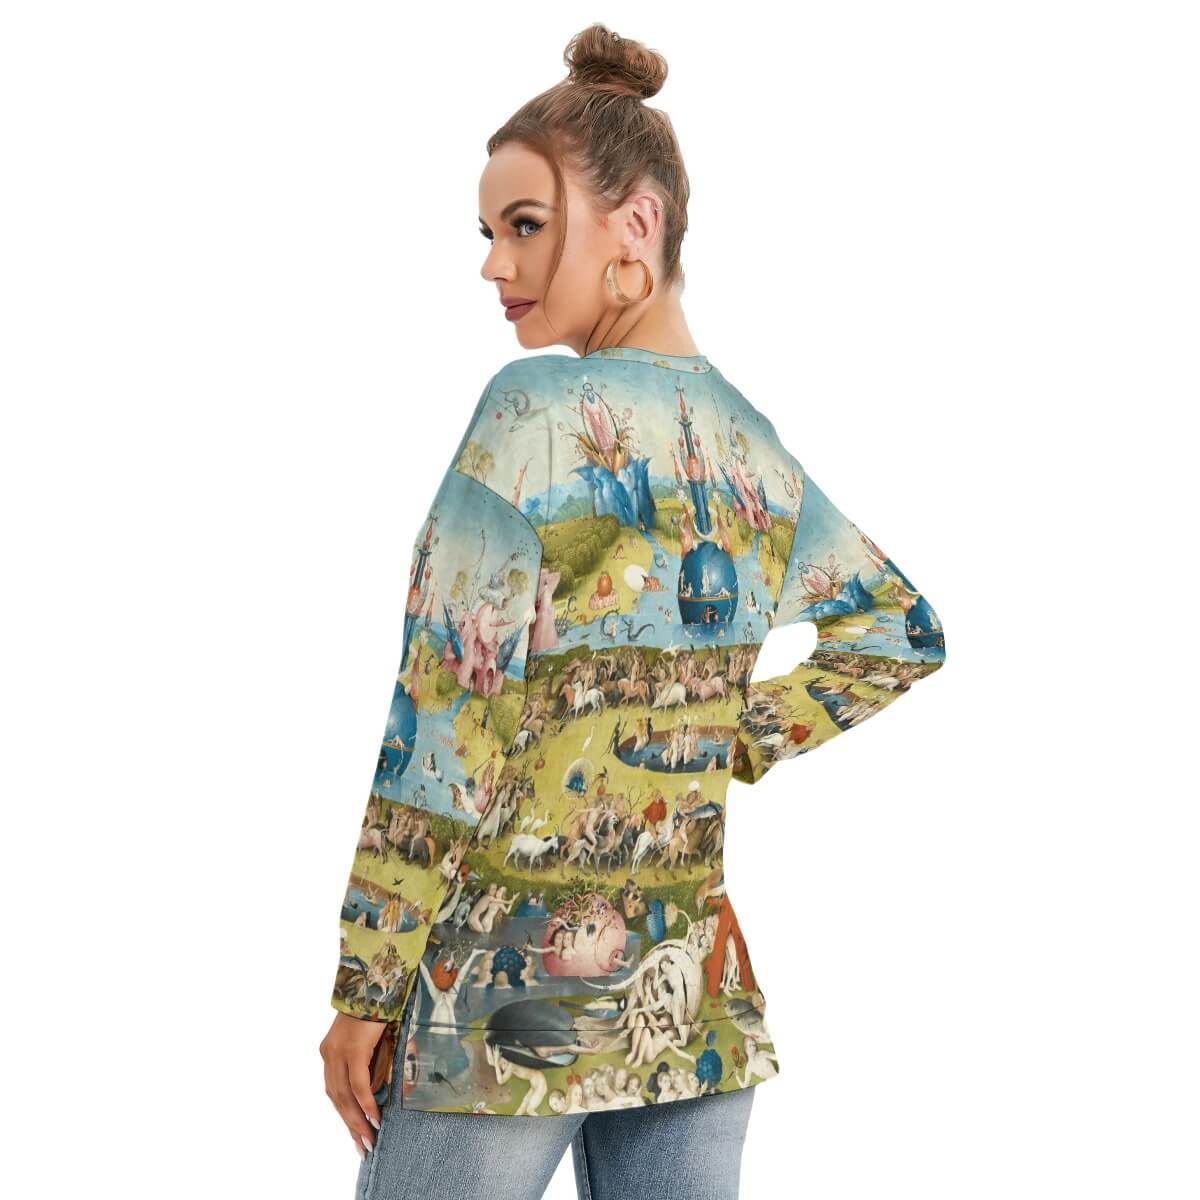 Garden of Earthly Delights Art Clothing